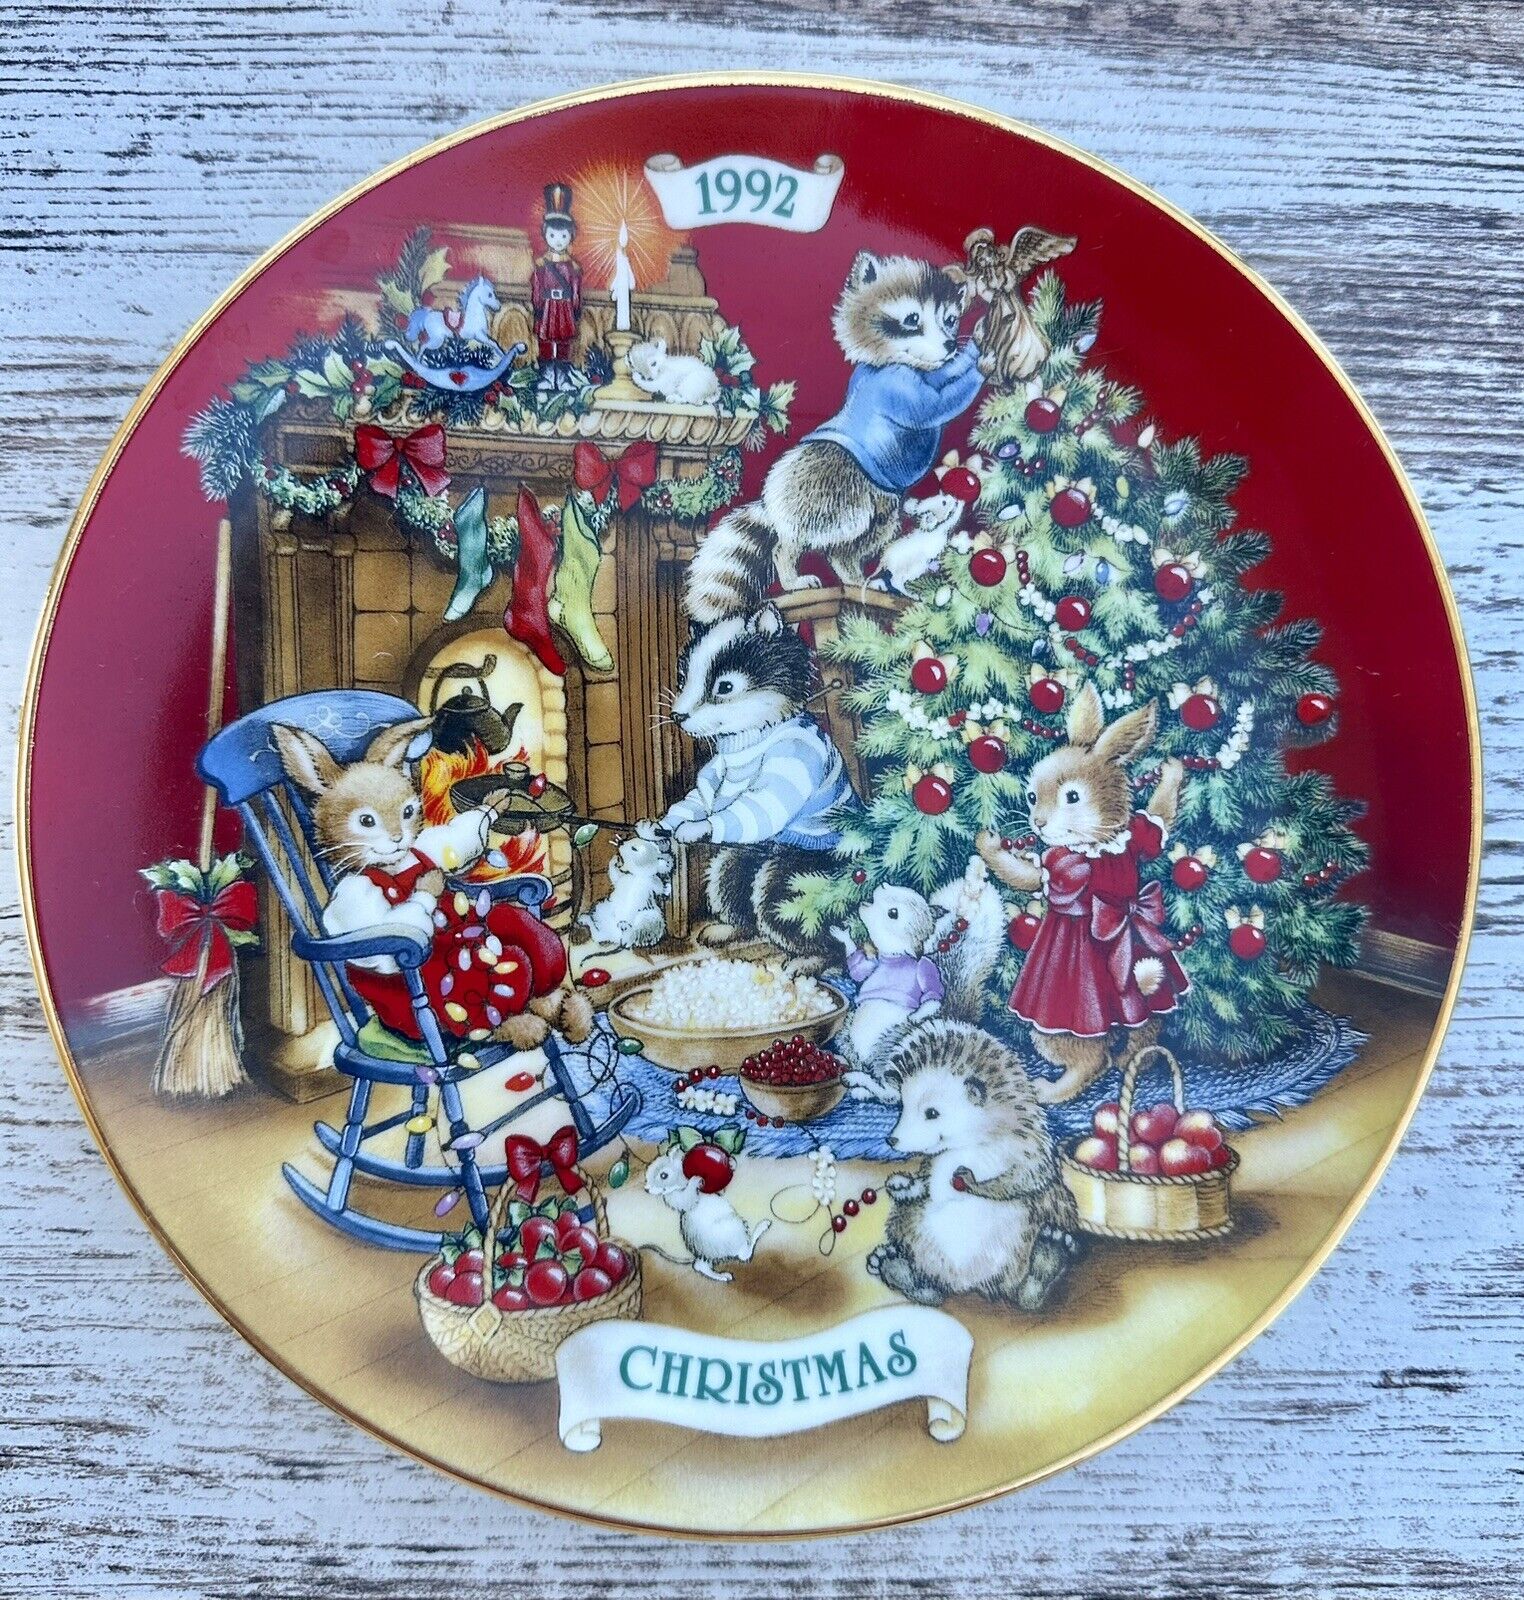 Vintage 1992 Avon Sharing Christmas With Friends Collectors Plate, 22 Karat Gold